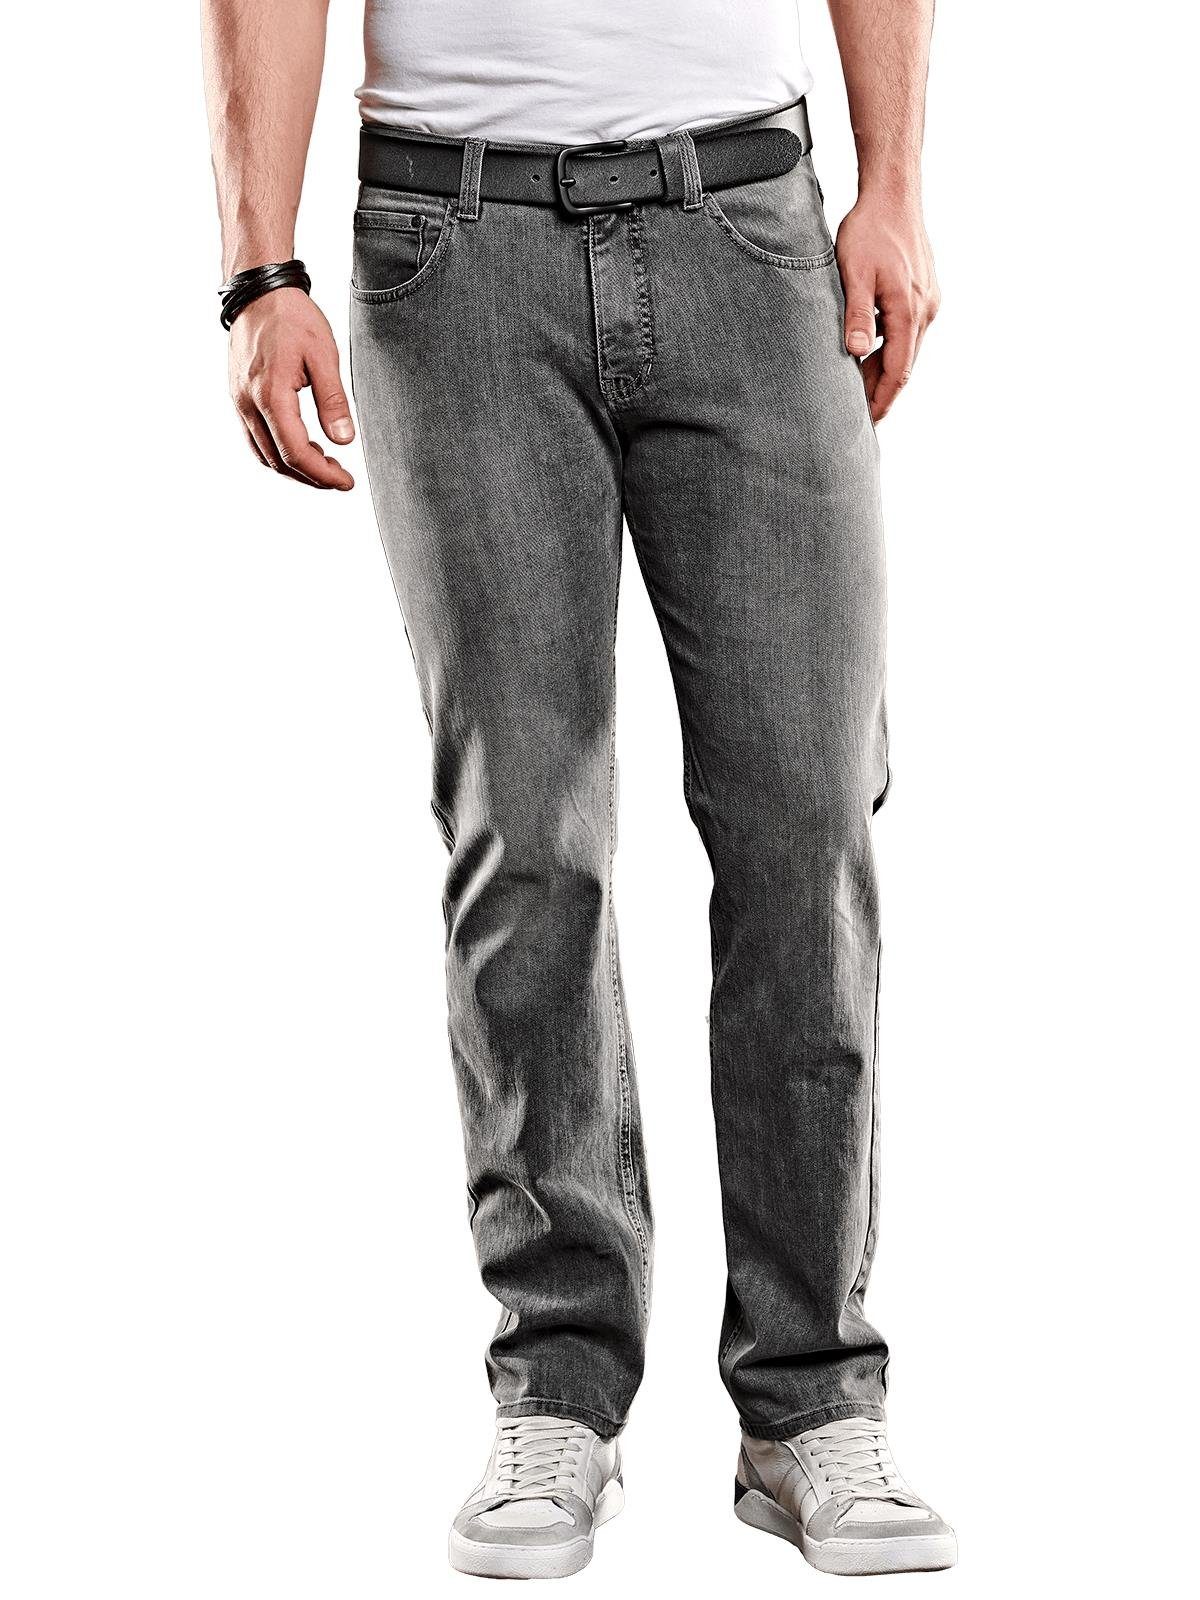 Engbers Bequeme Jeans Jeans Classic slim fit